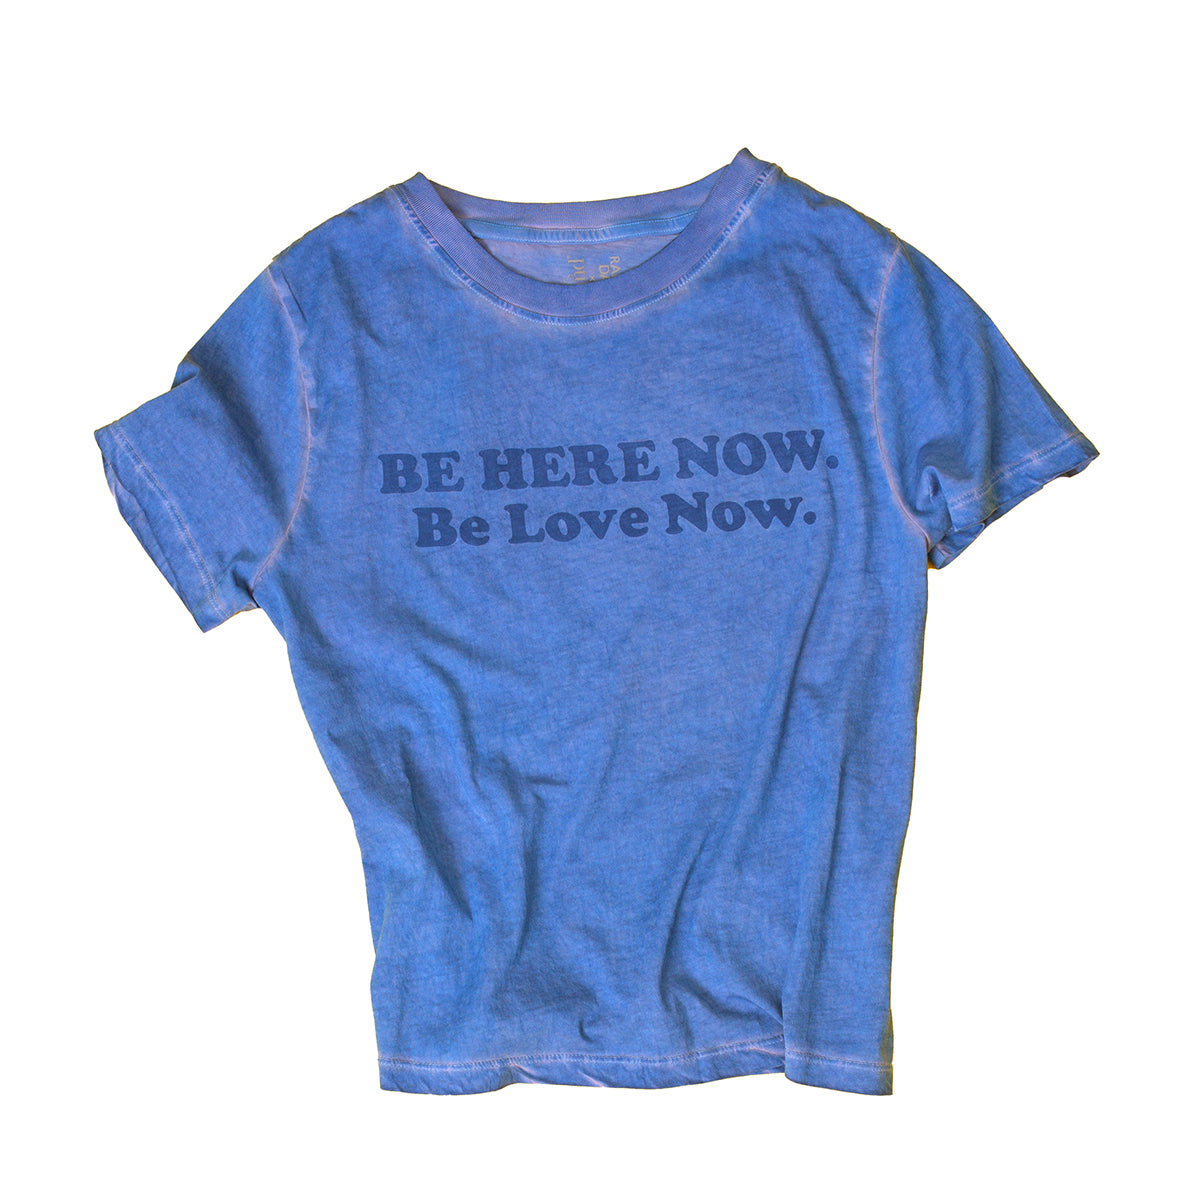 Be Here Now Be Love Now Organic Cotton Tee (Women's)